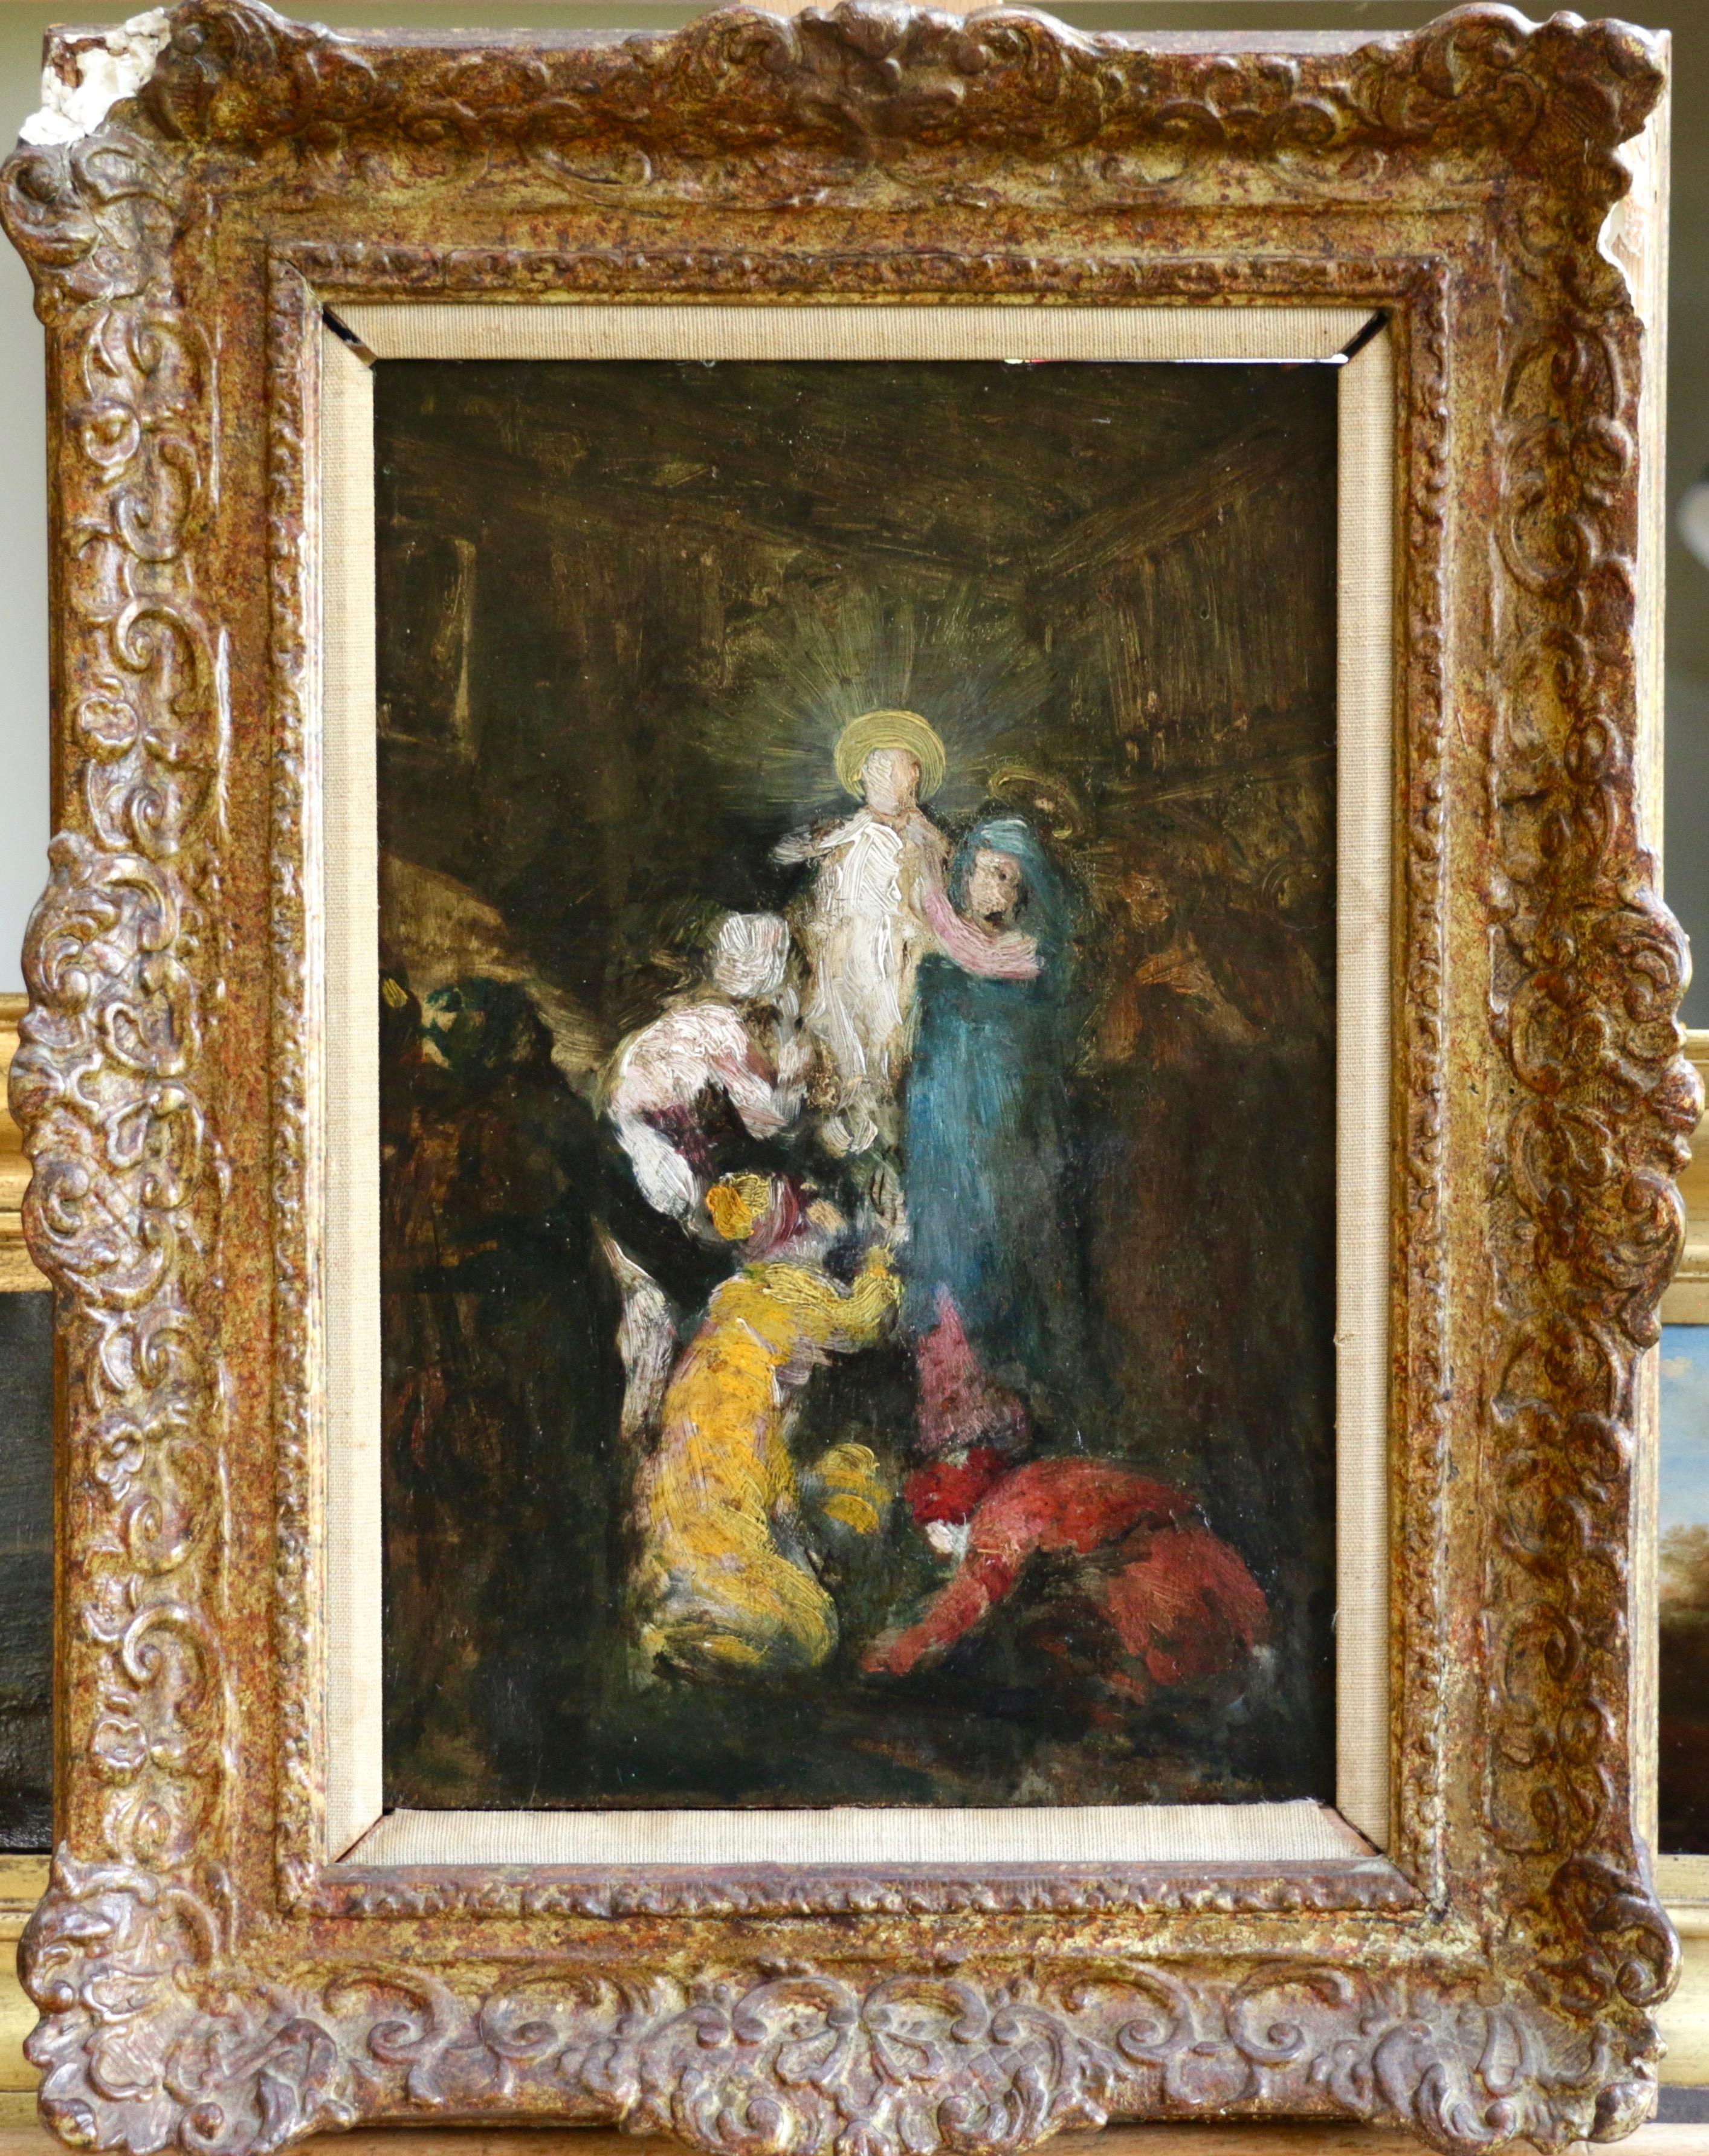 Oil on panel circa 1870. Framed dimensions are 18 inches high by 14 inches wide.

Monticelli entered the Paris studio of Paul Delaroche at the age of 22. His parents initially favoured a career as a pharmacist, but were soon convinced of his